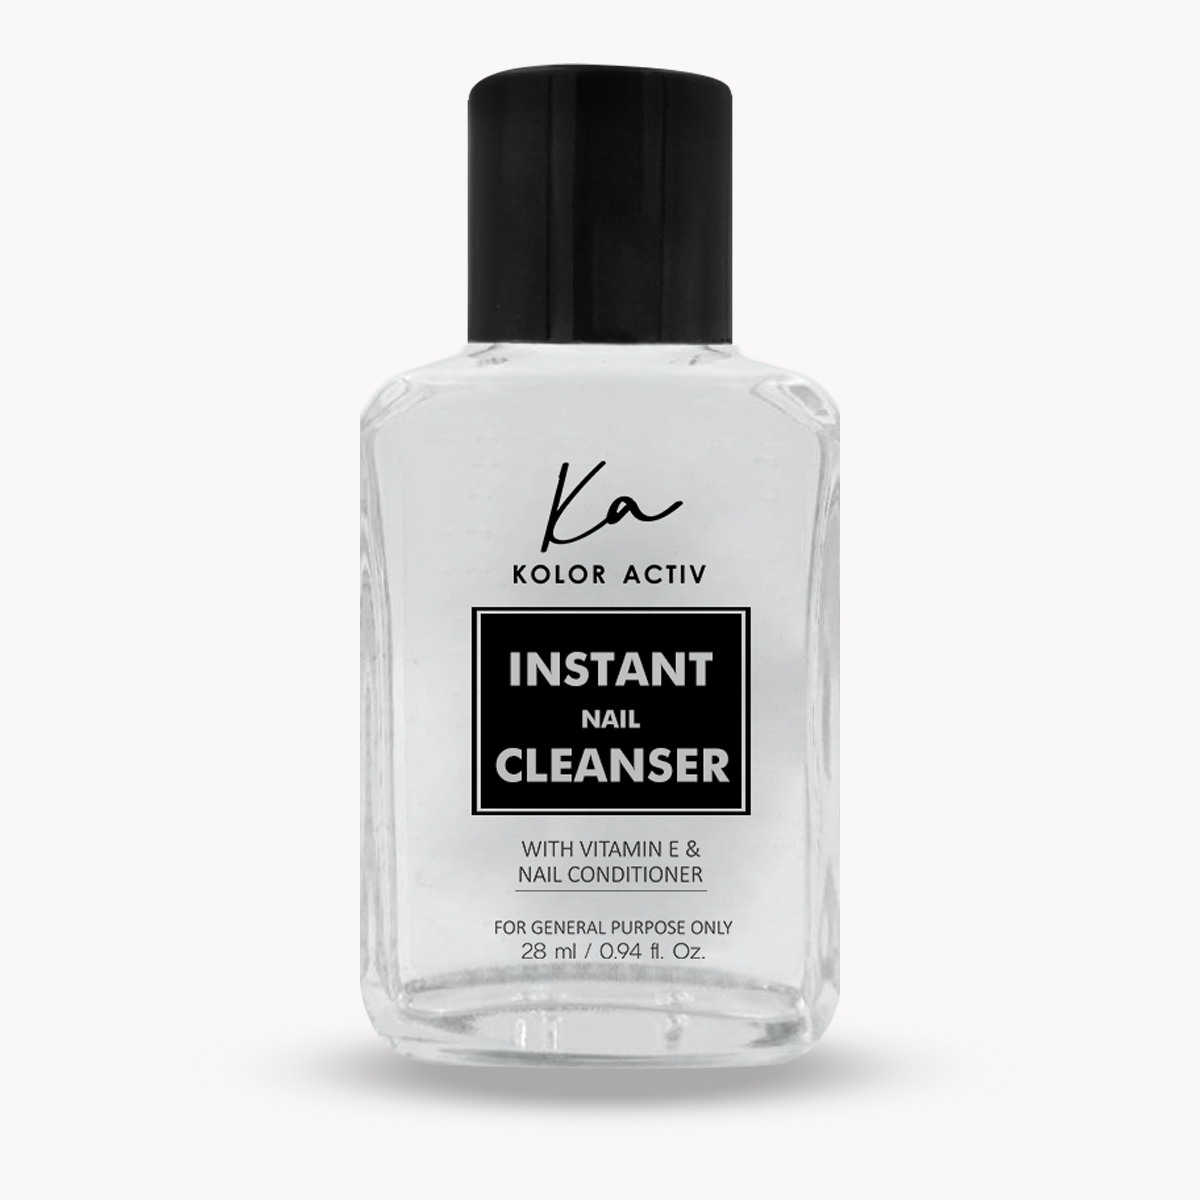 Instant nail cleanser